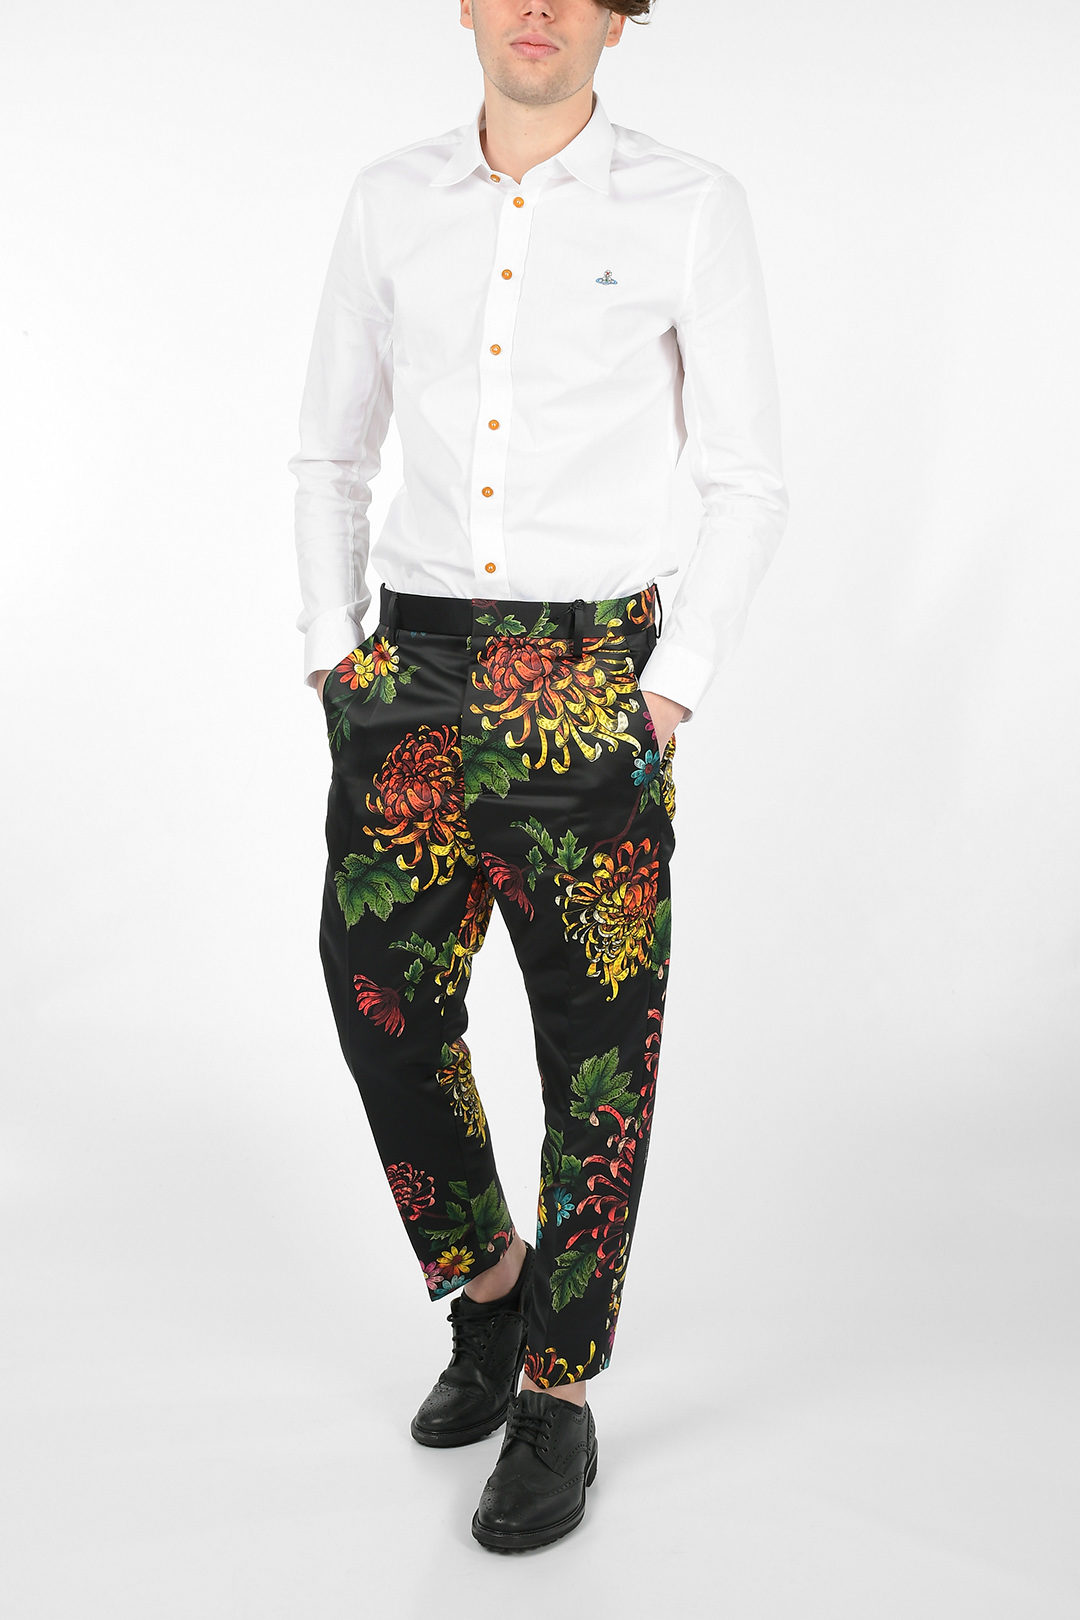 Floral Trousers  Buy Floral Trousers online in India